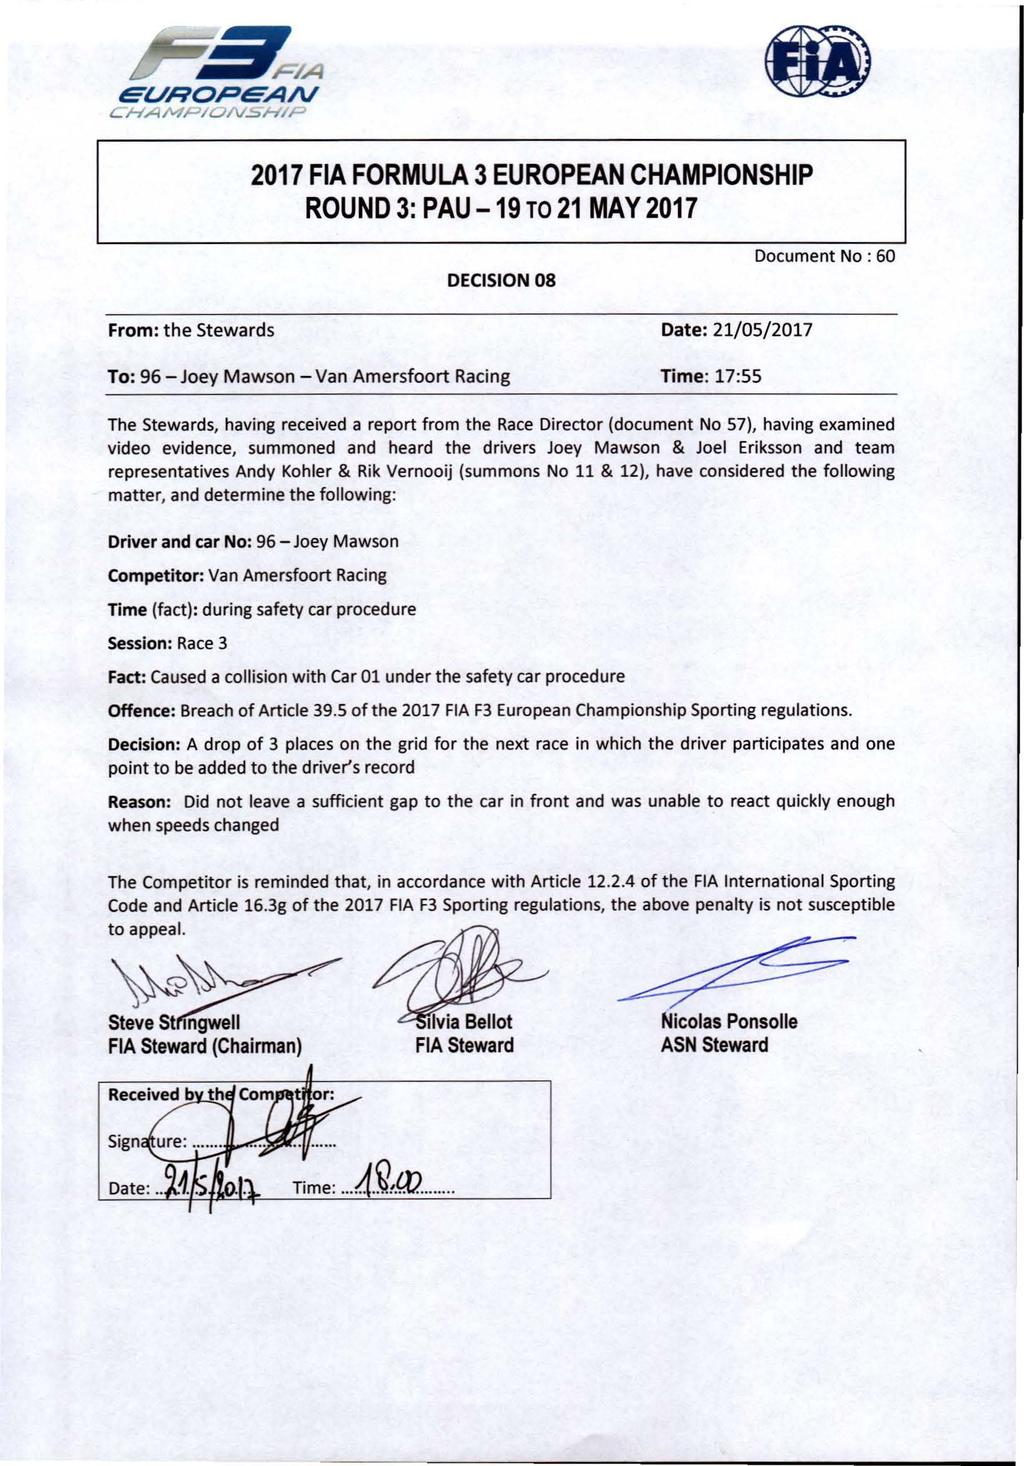 ~,,,.. EUROPEAN CHAM/-'/ON~H/µ 2017 FIA FORMULA 3 EUROPEAN CHAMPIONSHIP ROUND 3: PAU-19 TO 21MAY2017 DECISION 08 Document No : 60 From: the Stewards Date: 21/05/2017 To: 96 - Joey Mawson - Van